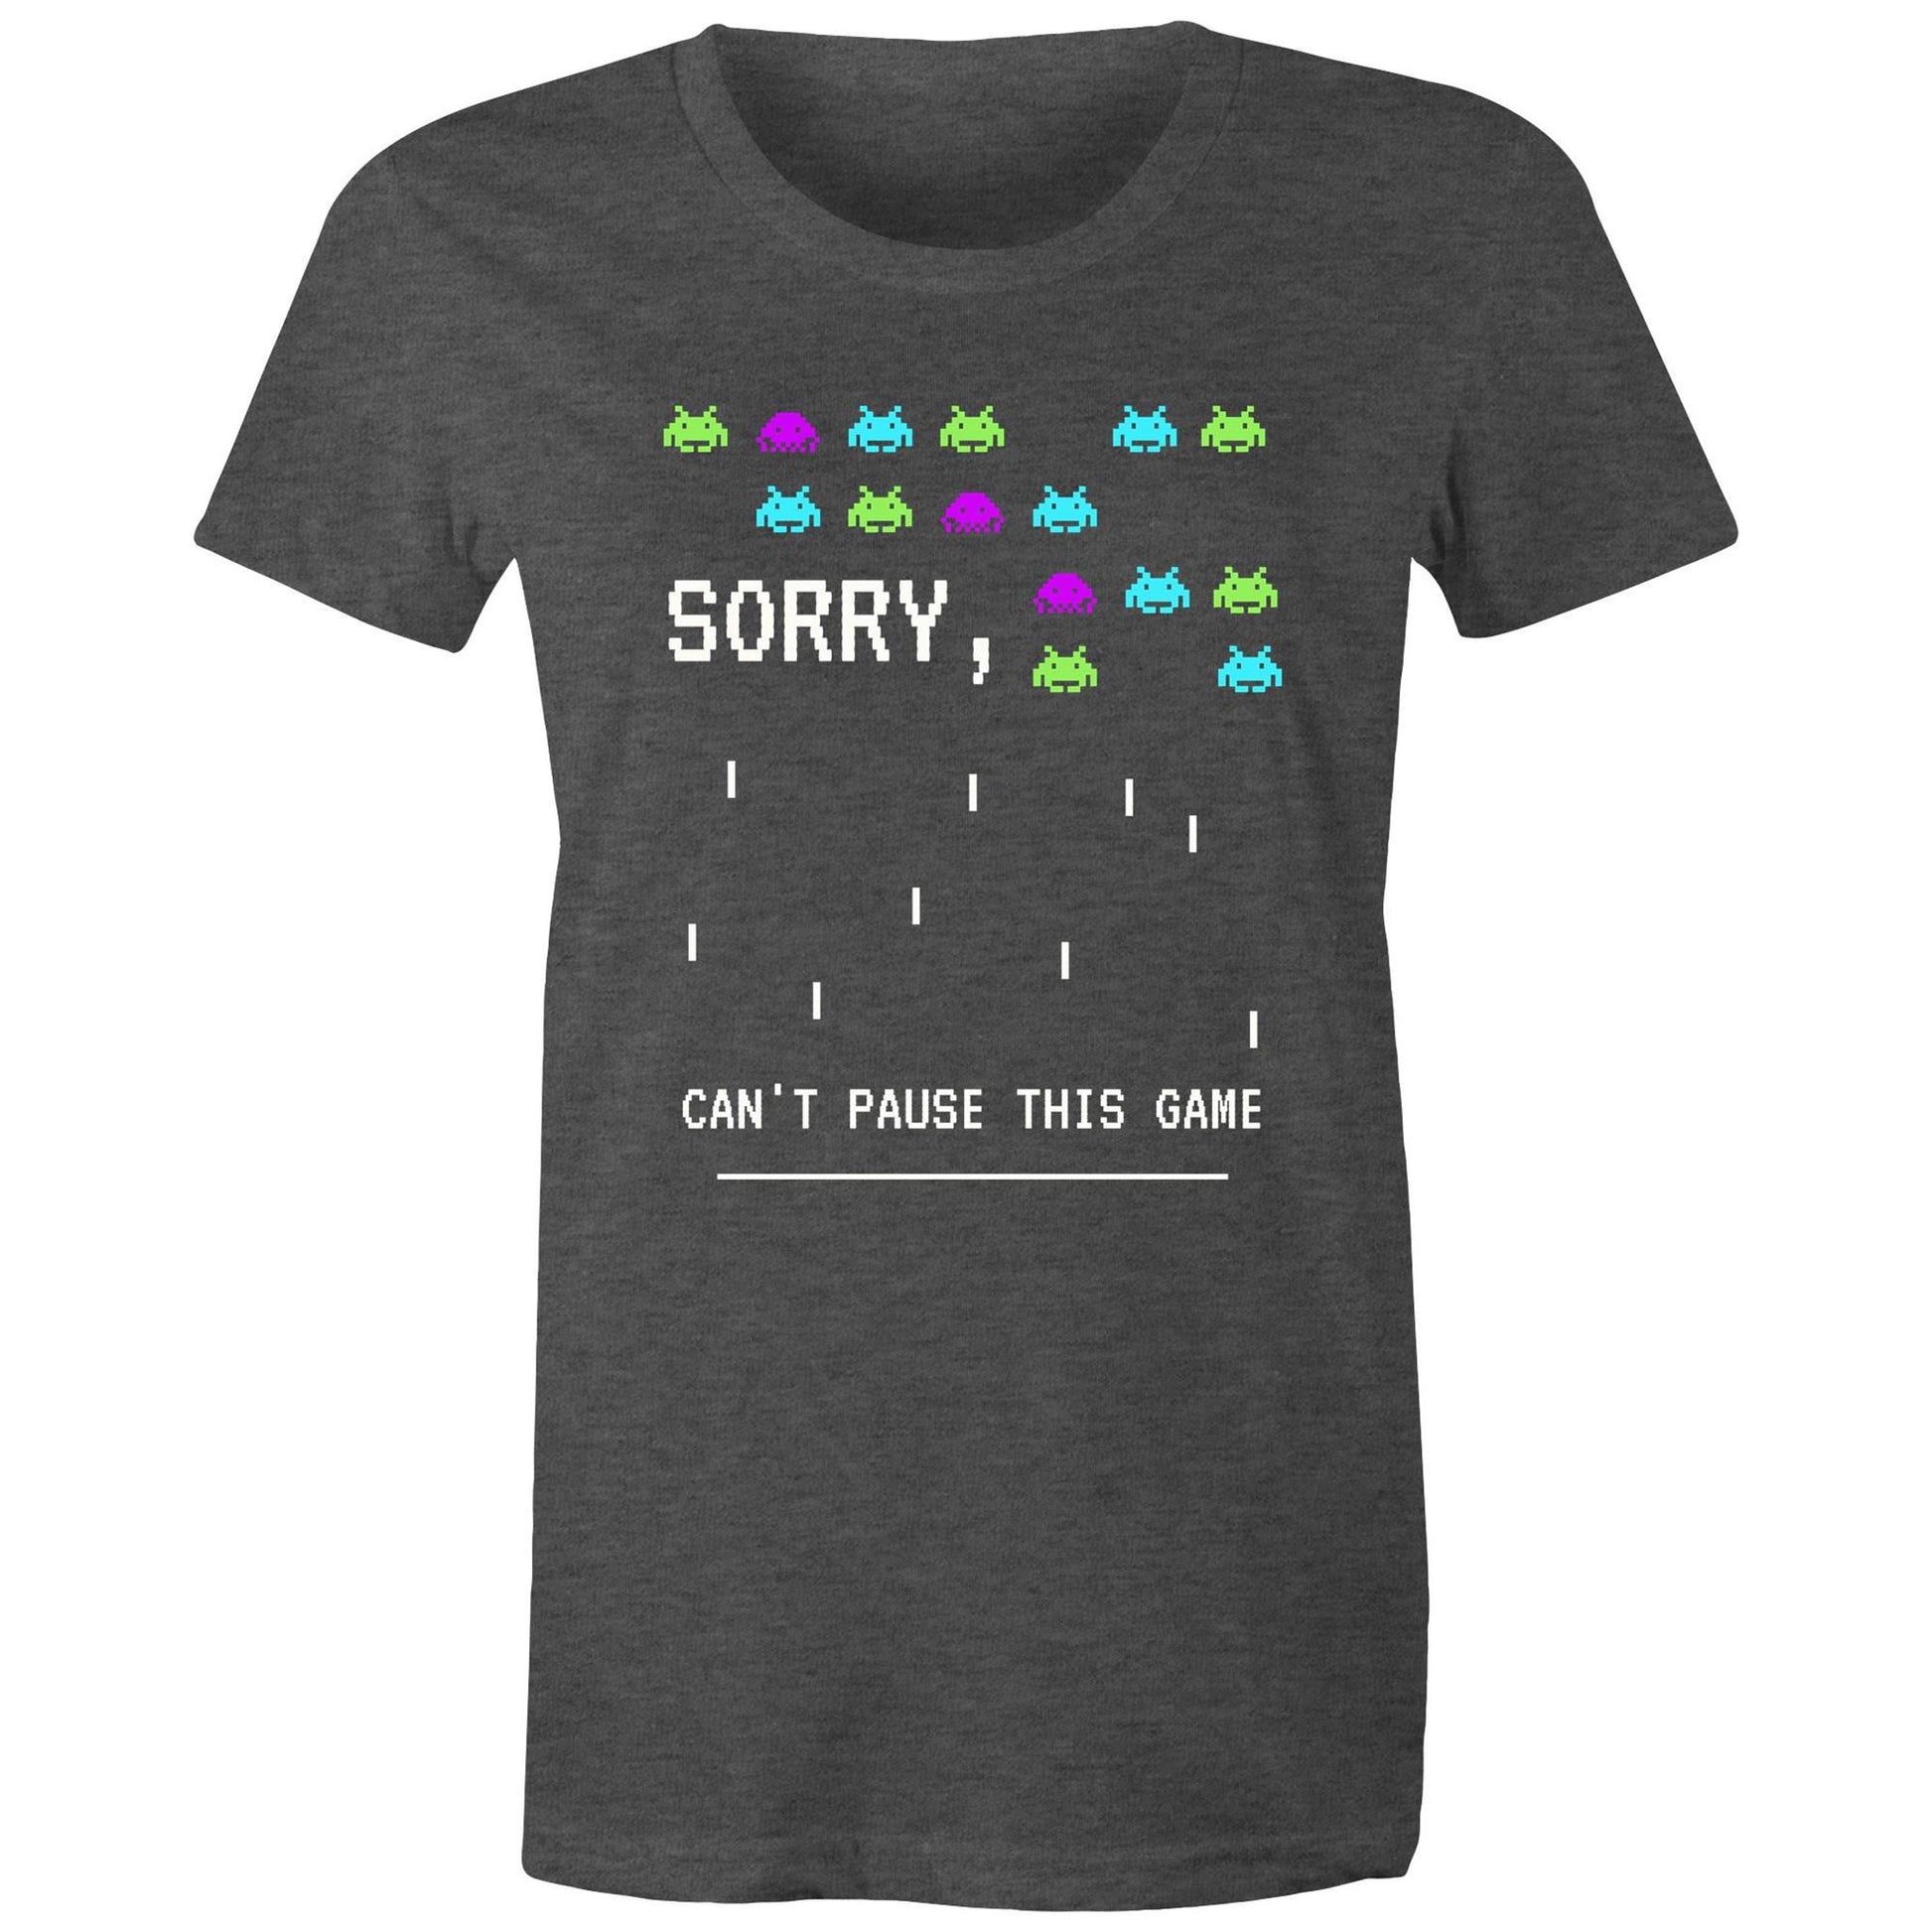 Sorry, Can't Pause This Game - Womens T-shirt Asphalt Marle Womens T-shirt Games